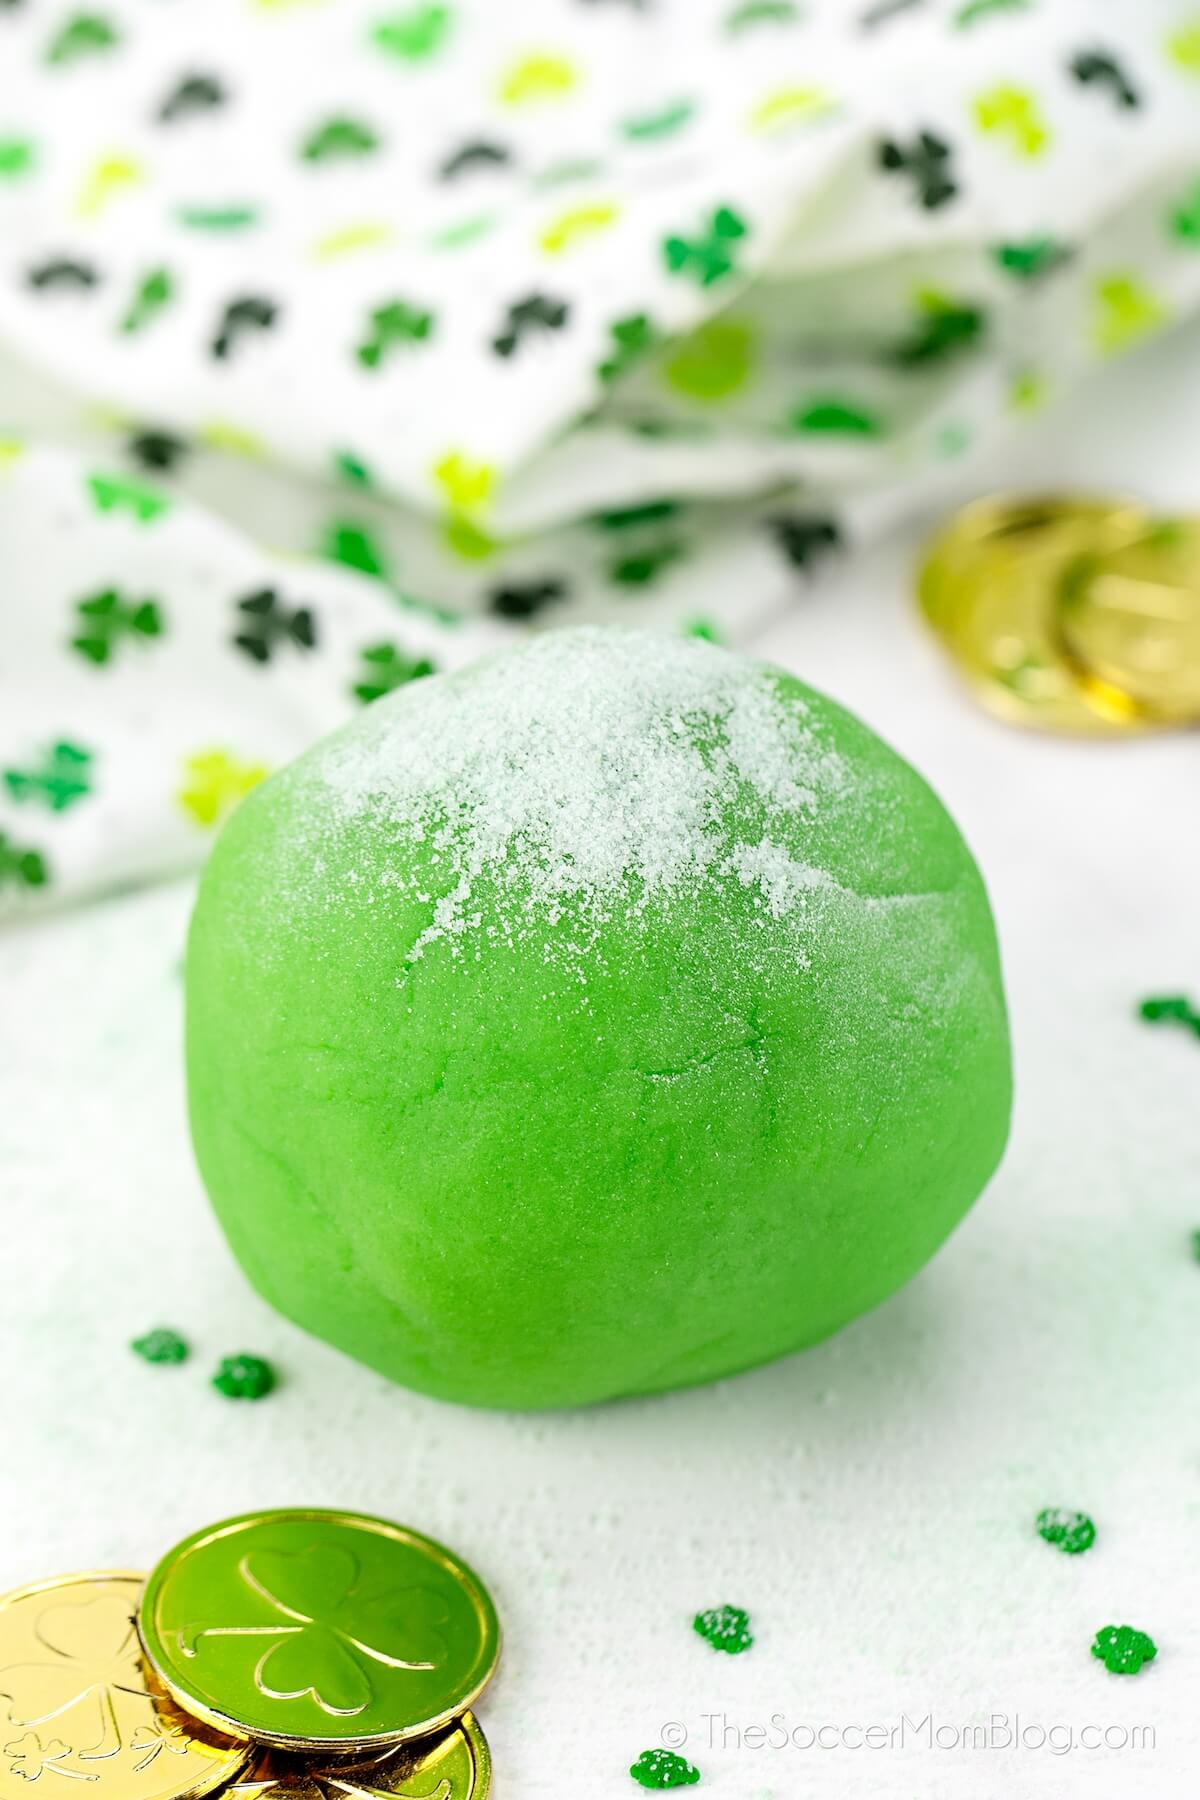 ball of lime green playdough with St. Patrick's Day themed decor